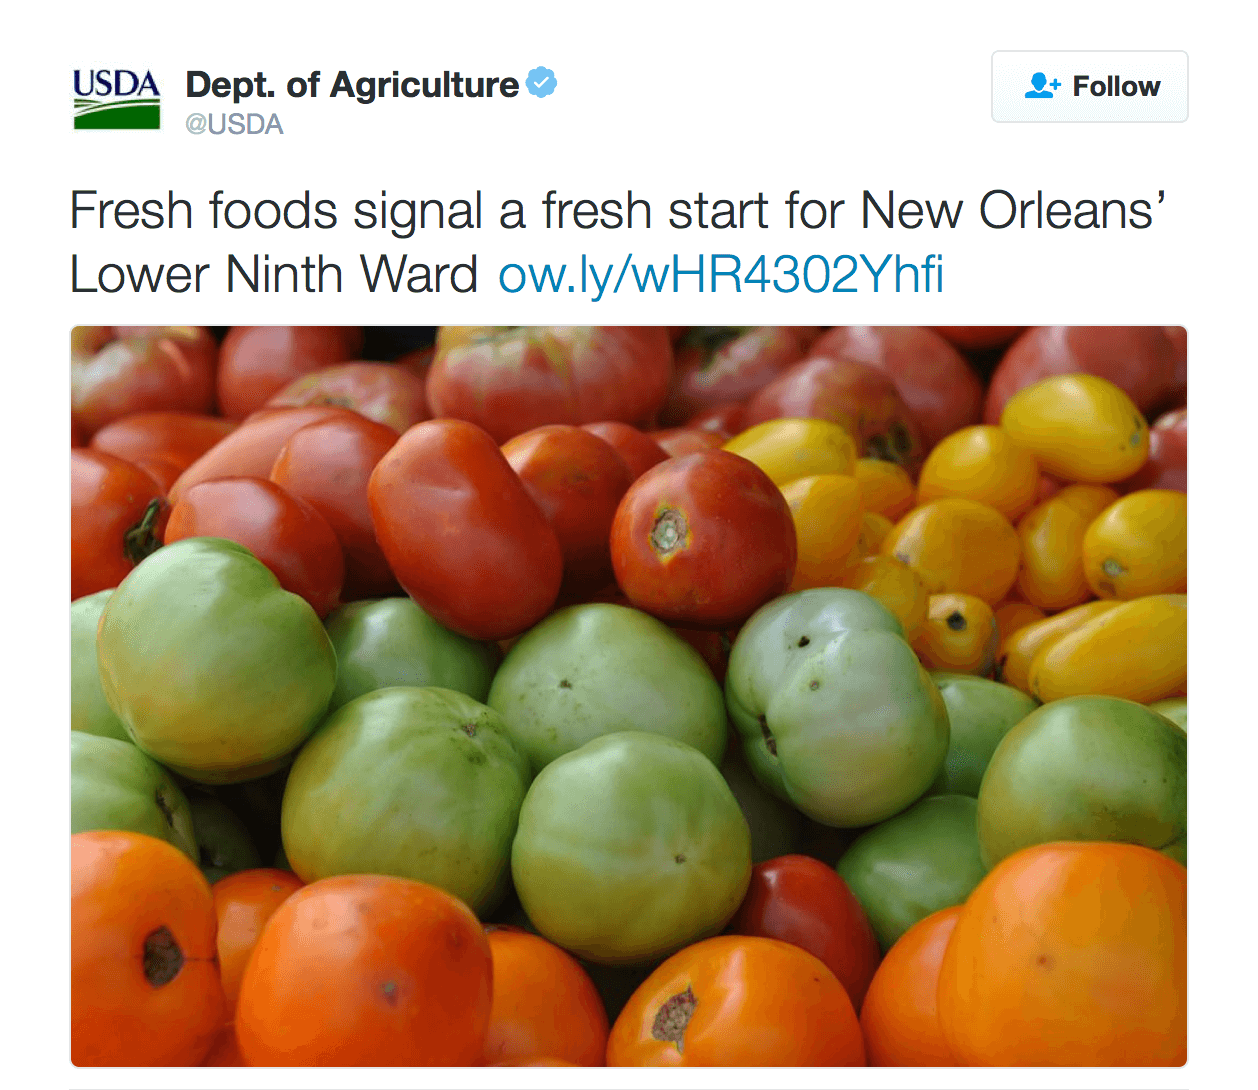 Fresh foods signal a fresh start for New Orleans’ Lower Ninth Ward http://ow.ly/wHR4302Yhfi 